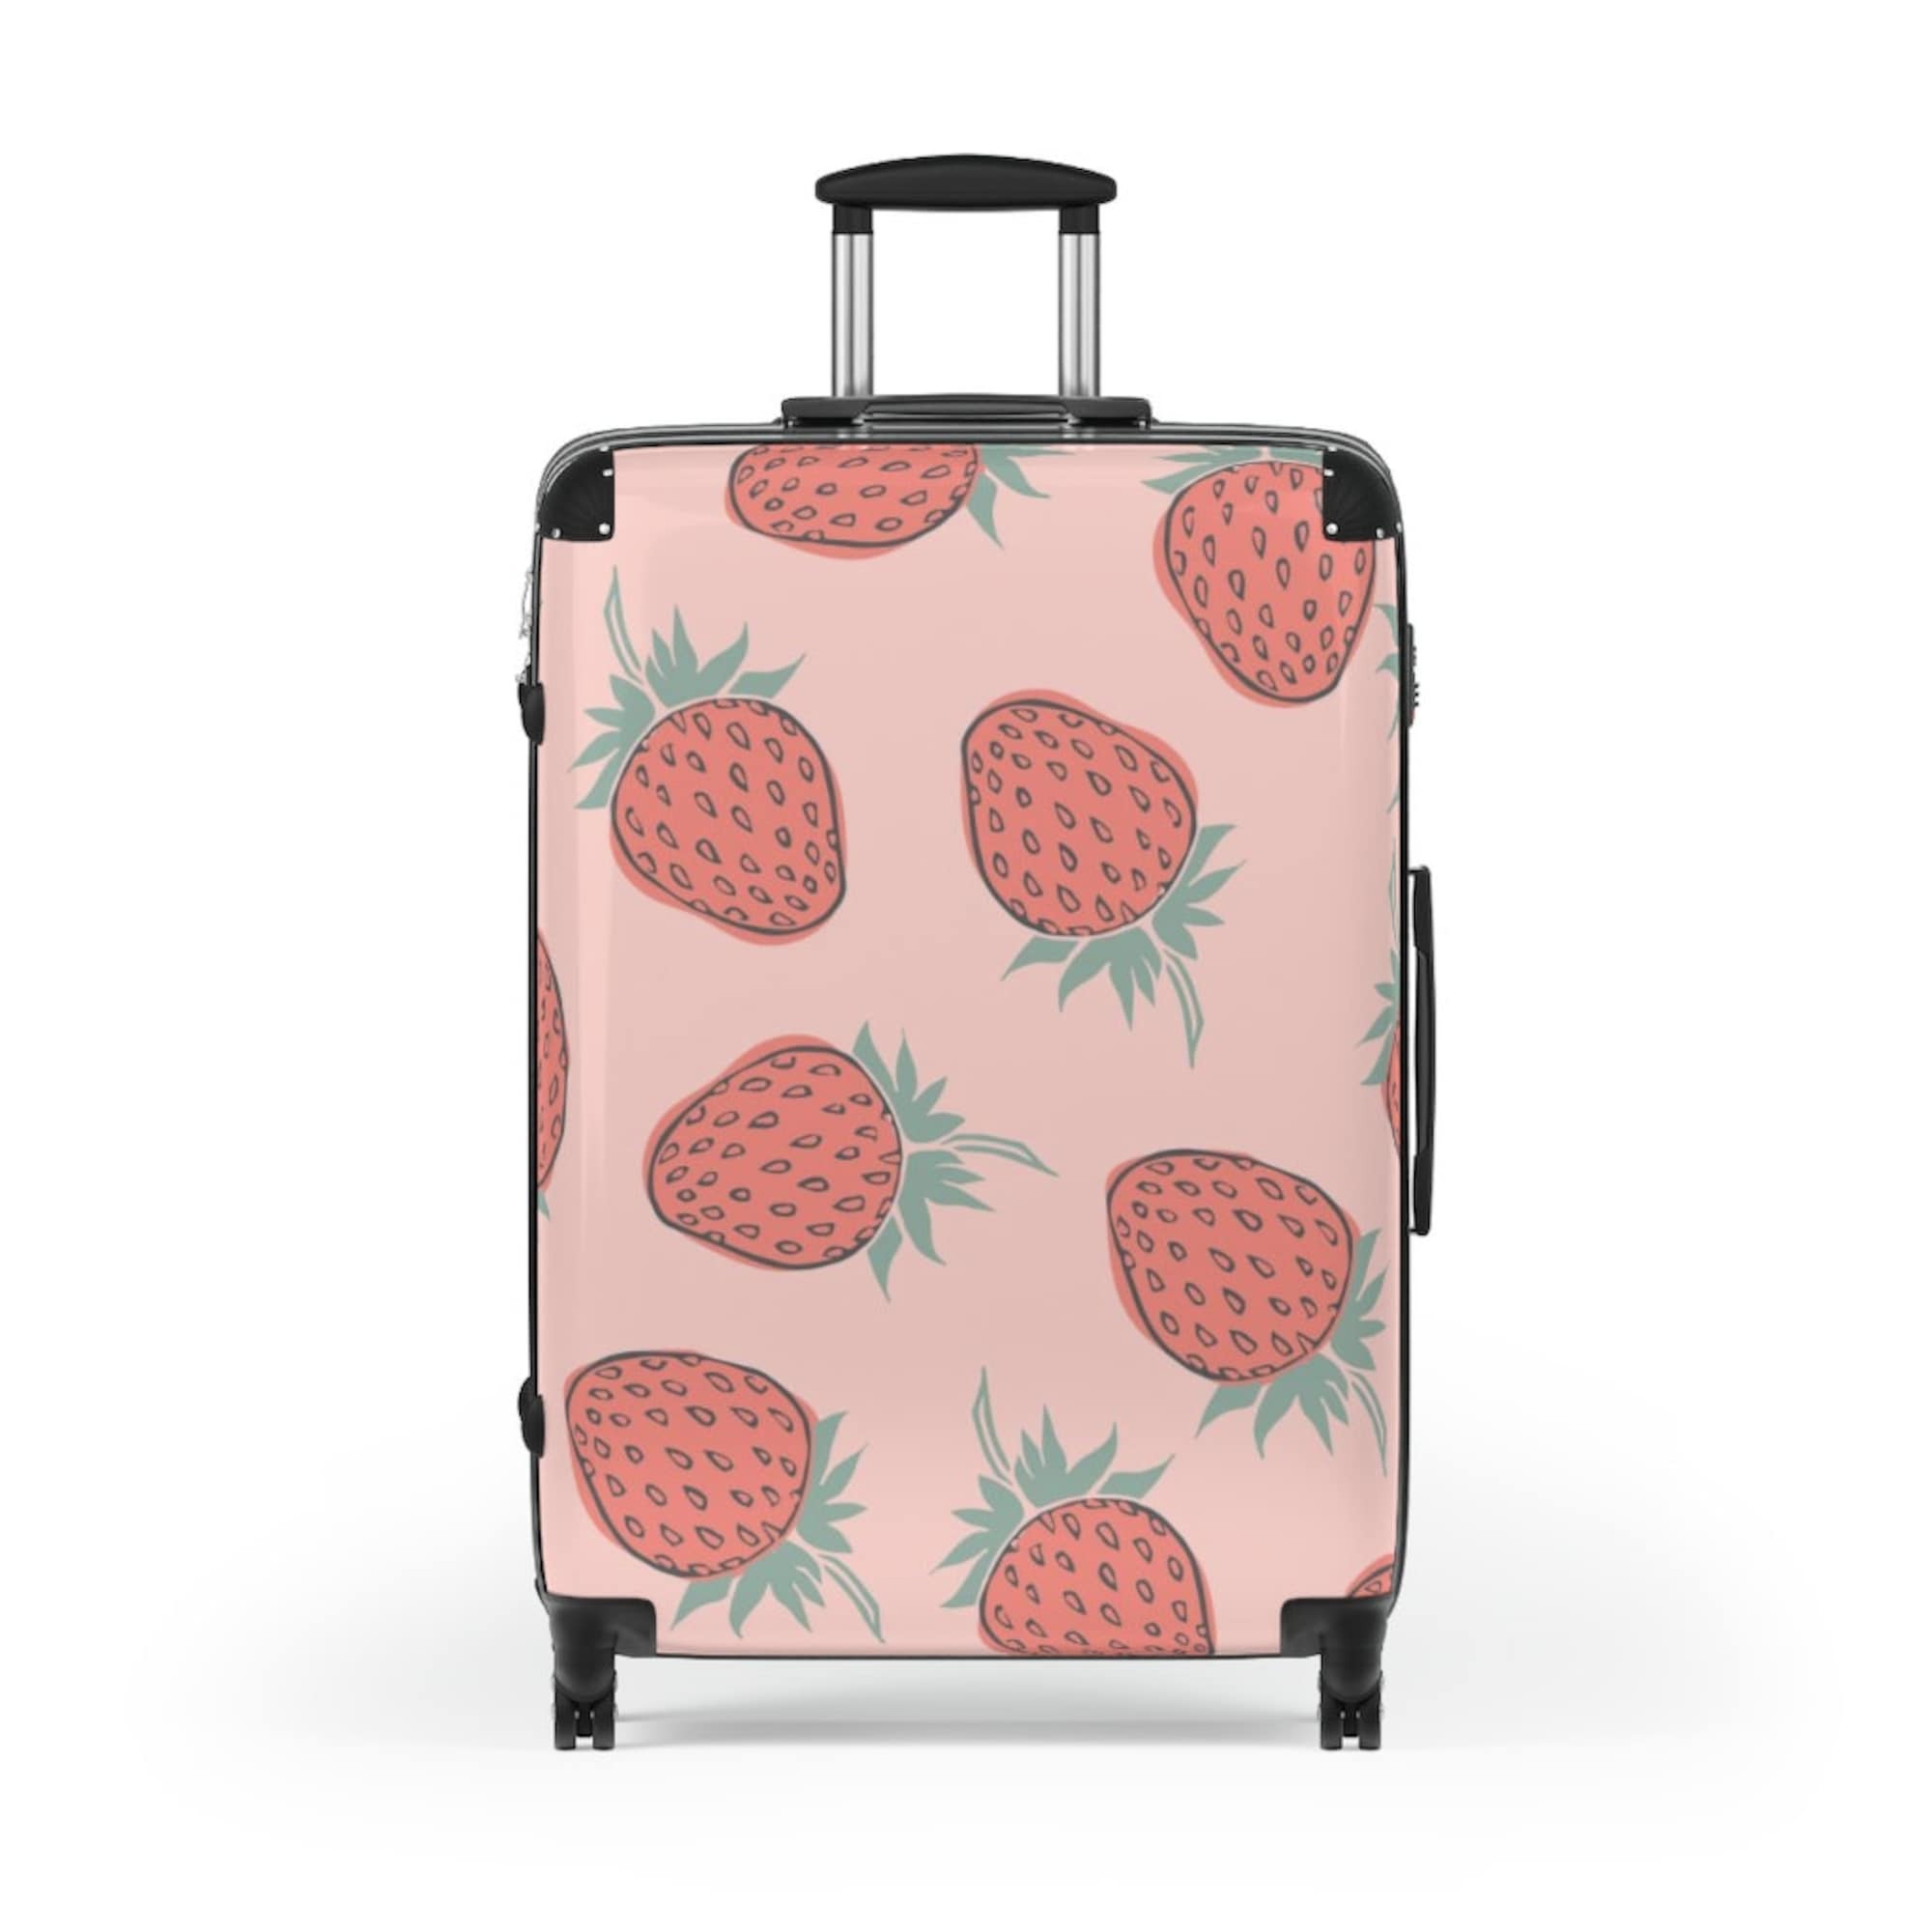 Discover The Strawberry Suitcase